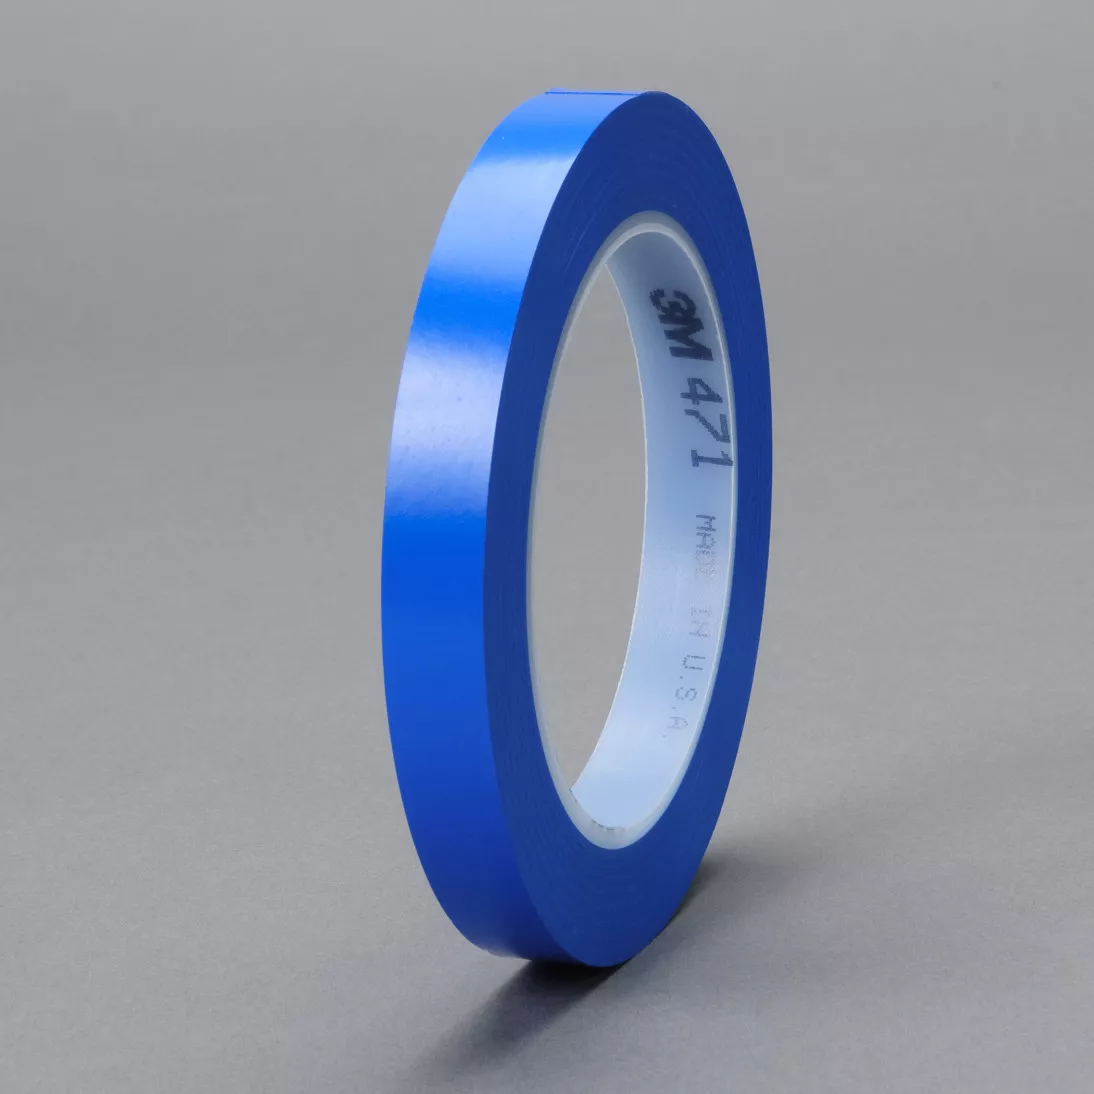 3M™ Vinyl Tape 471 Blue PN36409, 3/4 in x 36 yd, 48 individually wrapped
rolls per case Conveniently Packaged